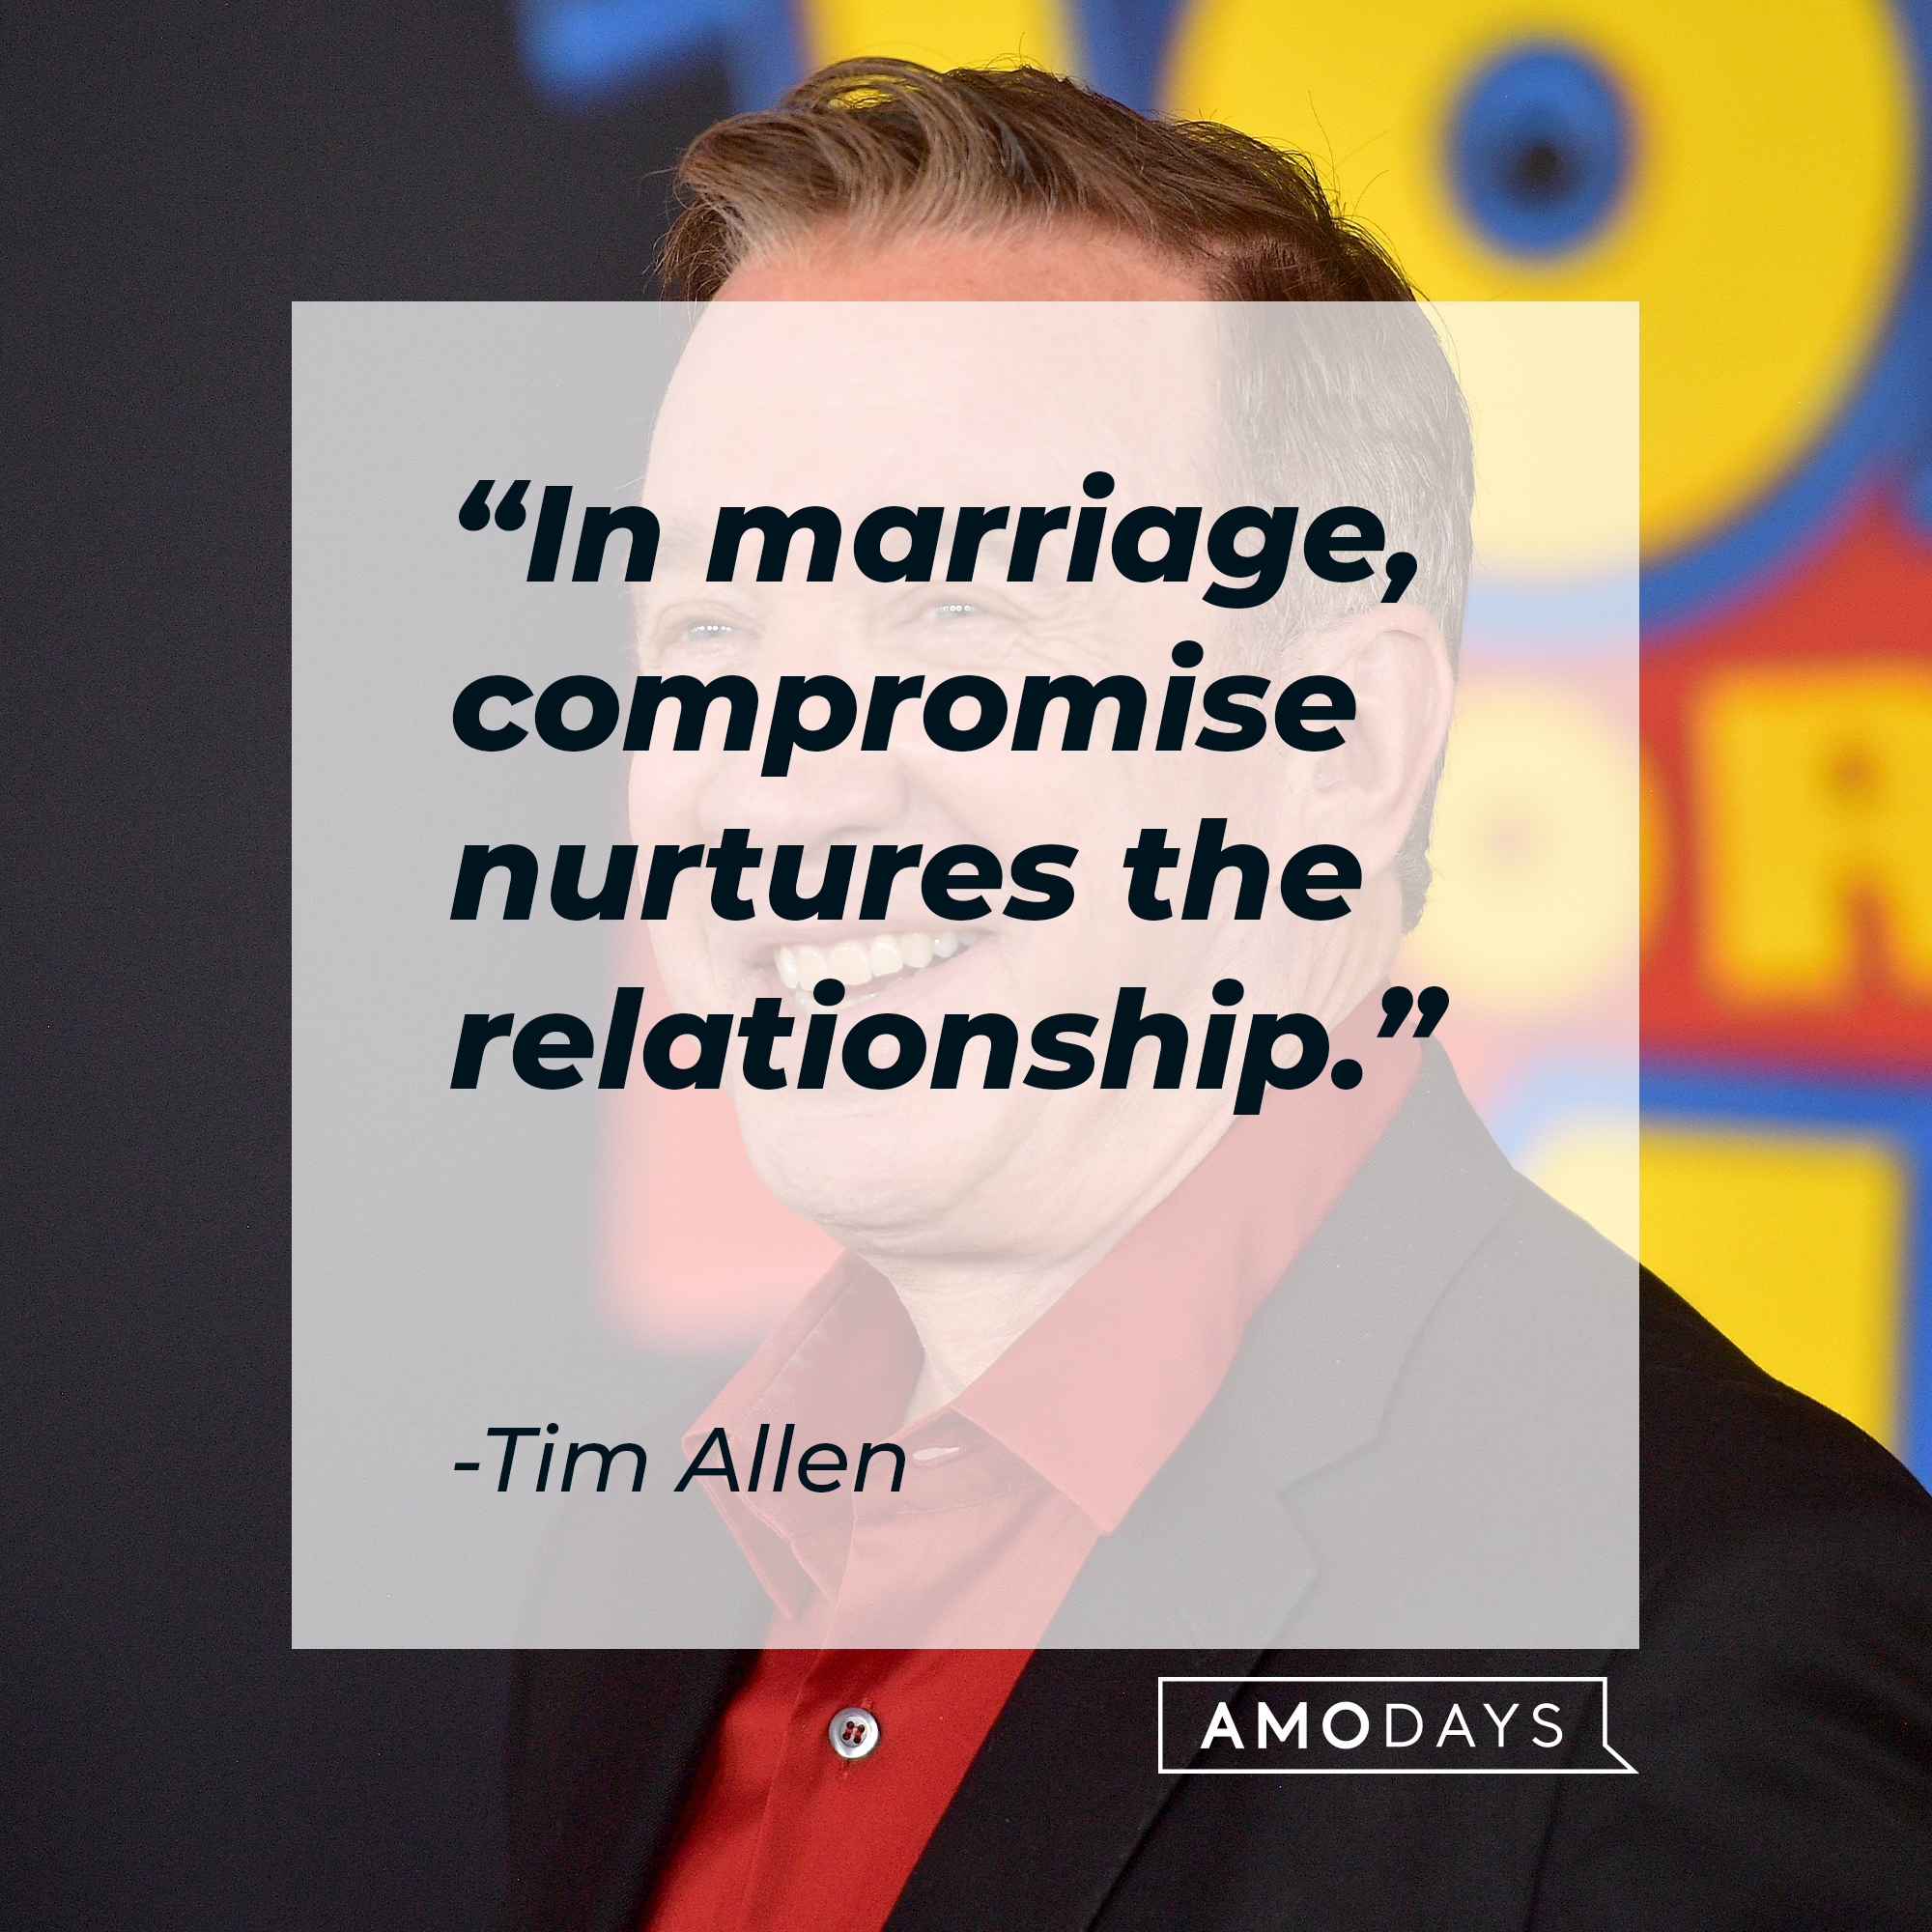 An image of Tim Allen, with his quote: “In marriage, compromise nurtures the relationship.”┃Source: Getty Images